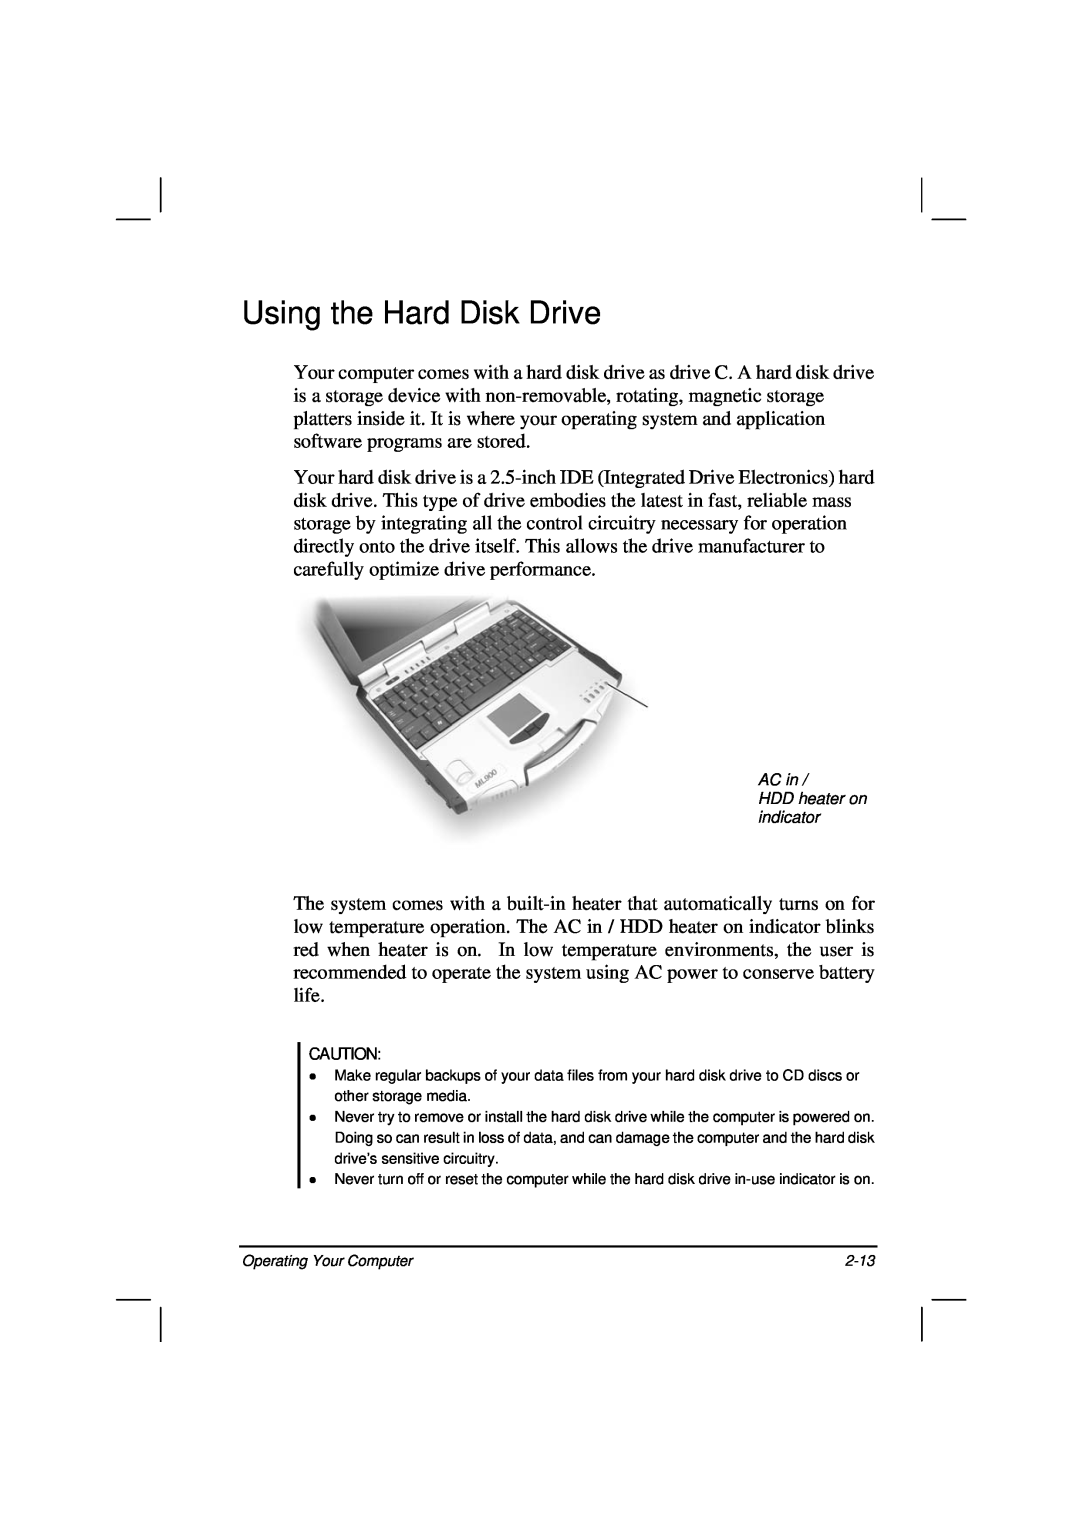 Casio HK1223 owner manual Using the Hard Disk Drive, AC in HDD heater on indicator 